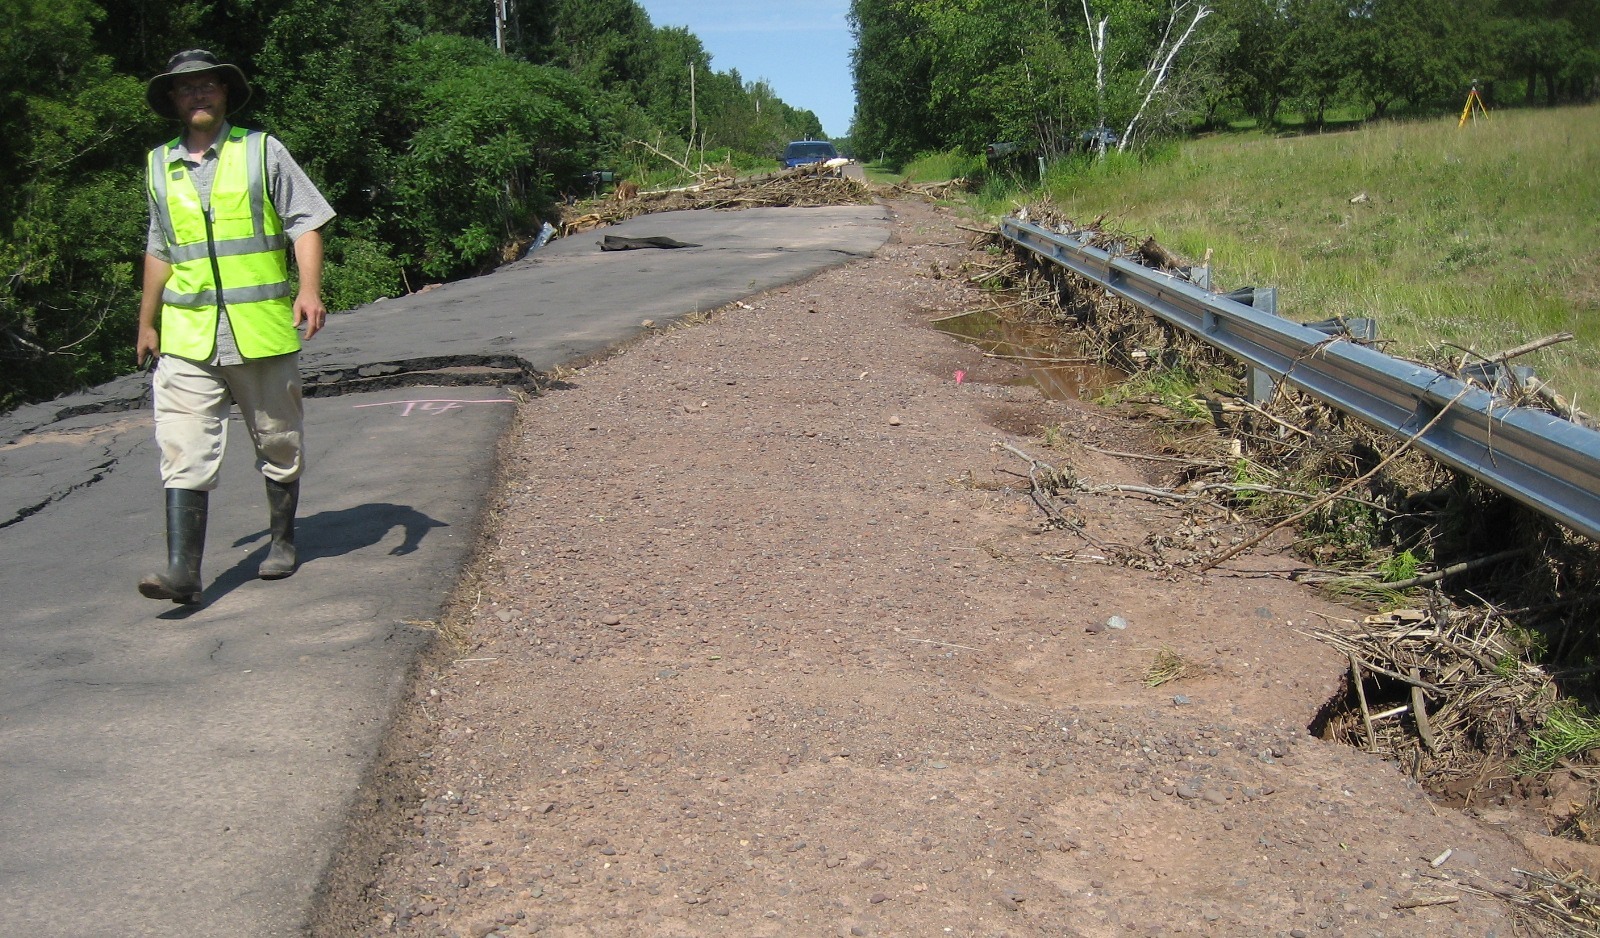 A section of Lake Road at Maki Creek that didn’t wash out, but had flows over the road, as evidenced by the debris stuck in the guard rail.